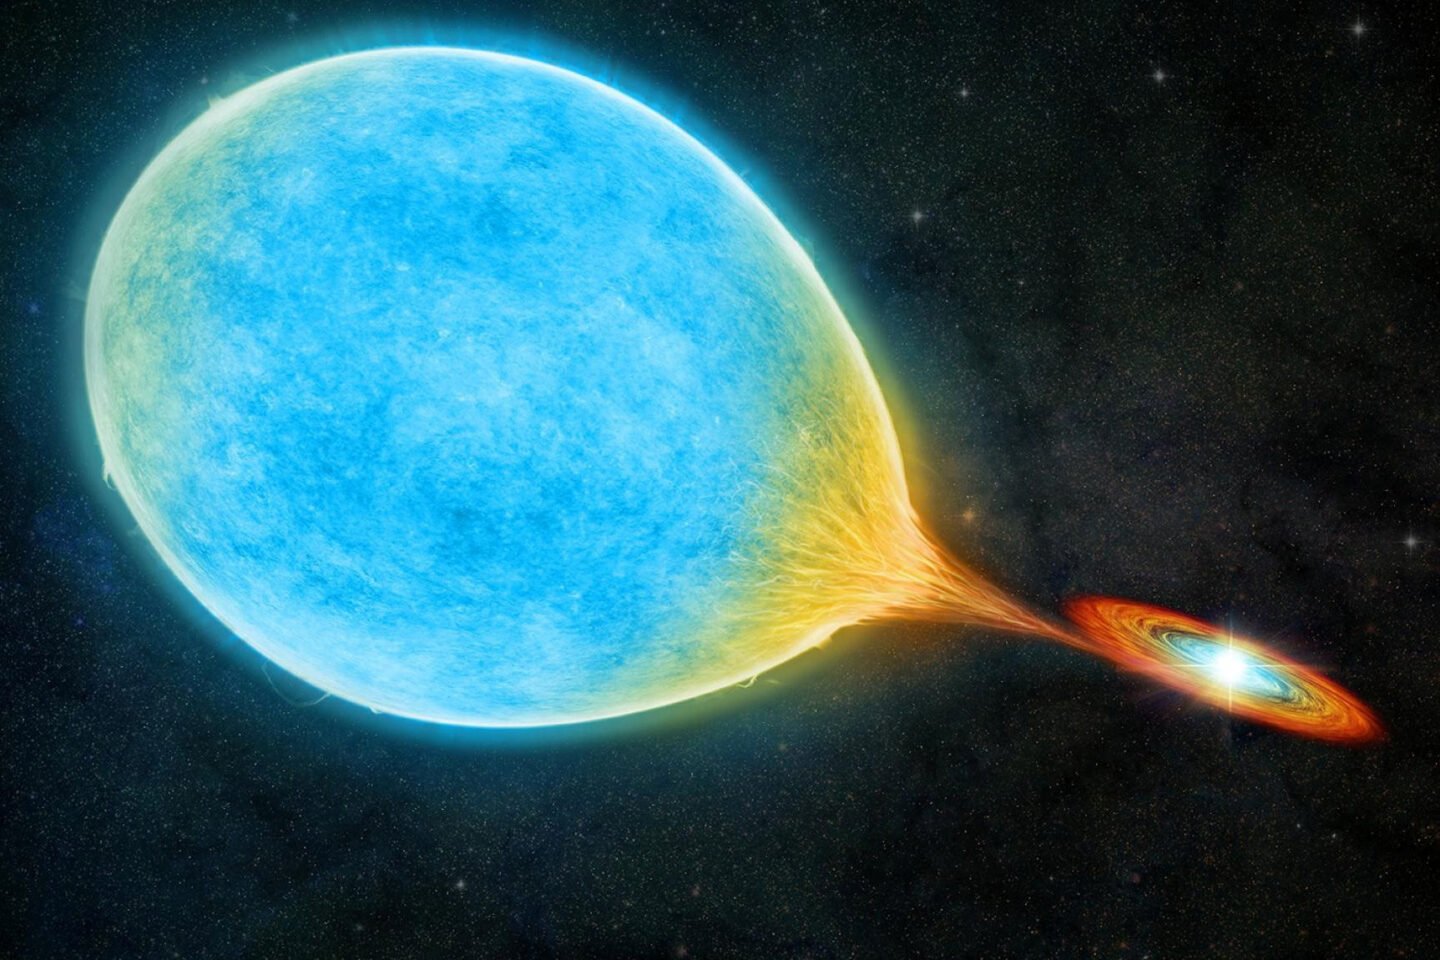 Cosmic relationship: a star ate its spouse